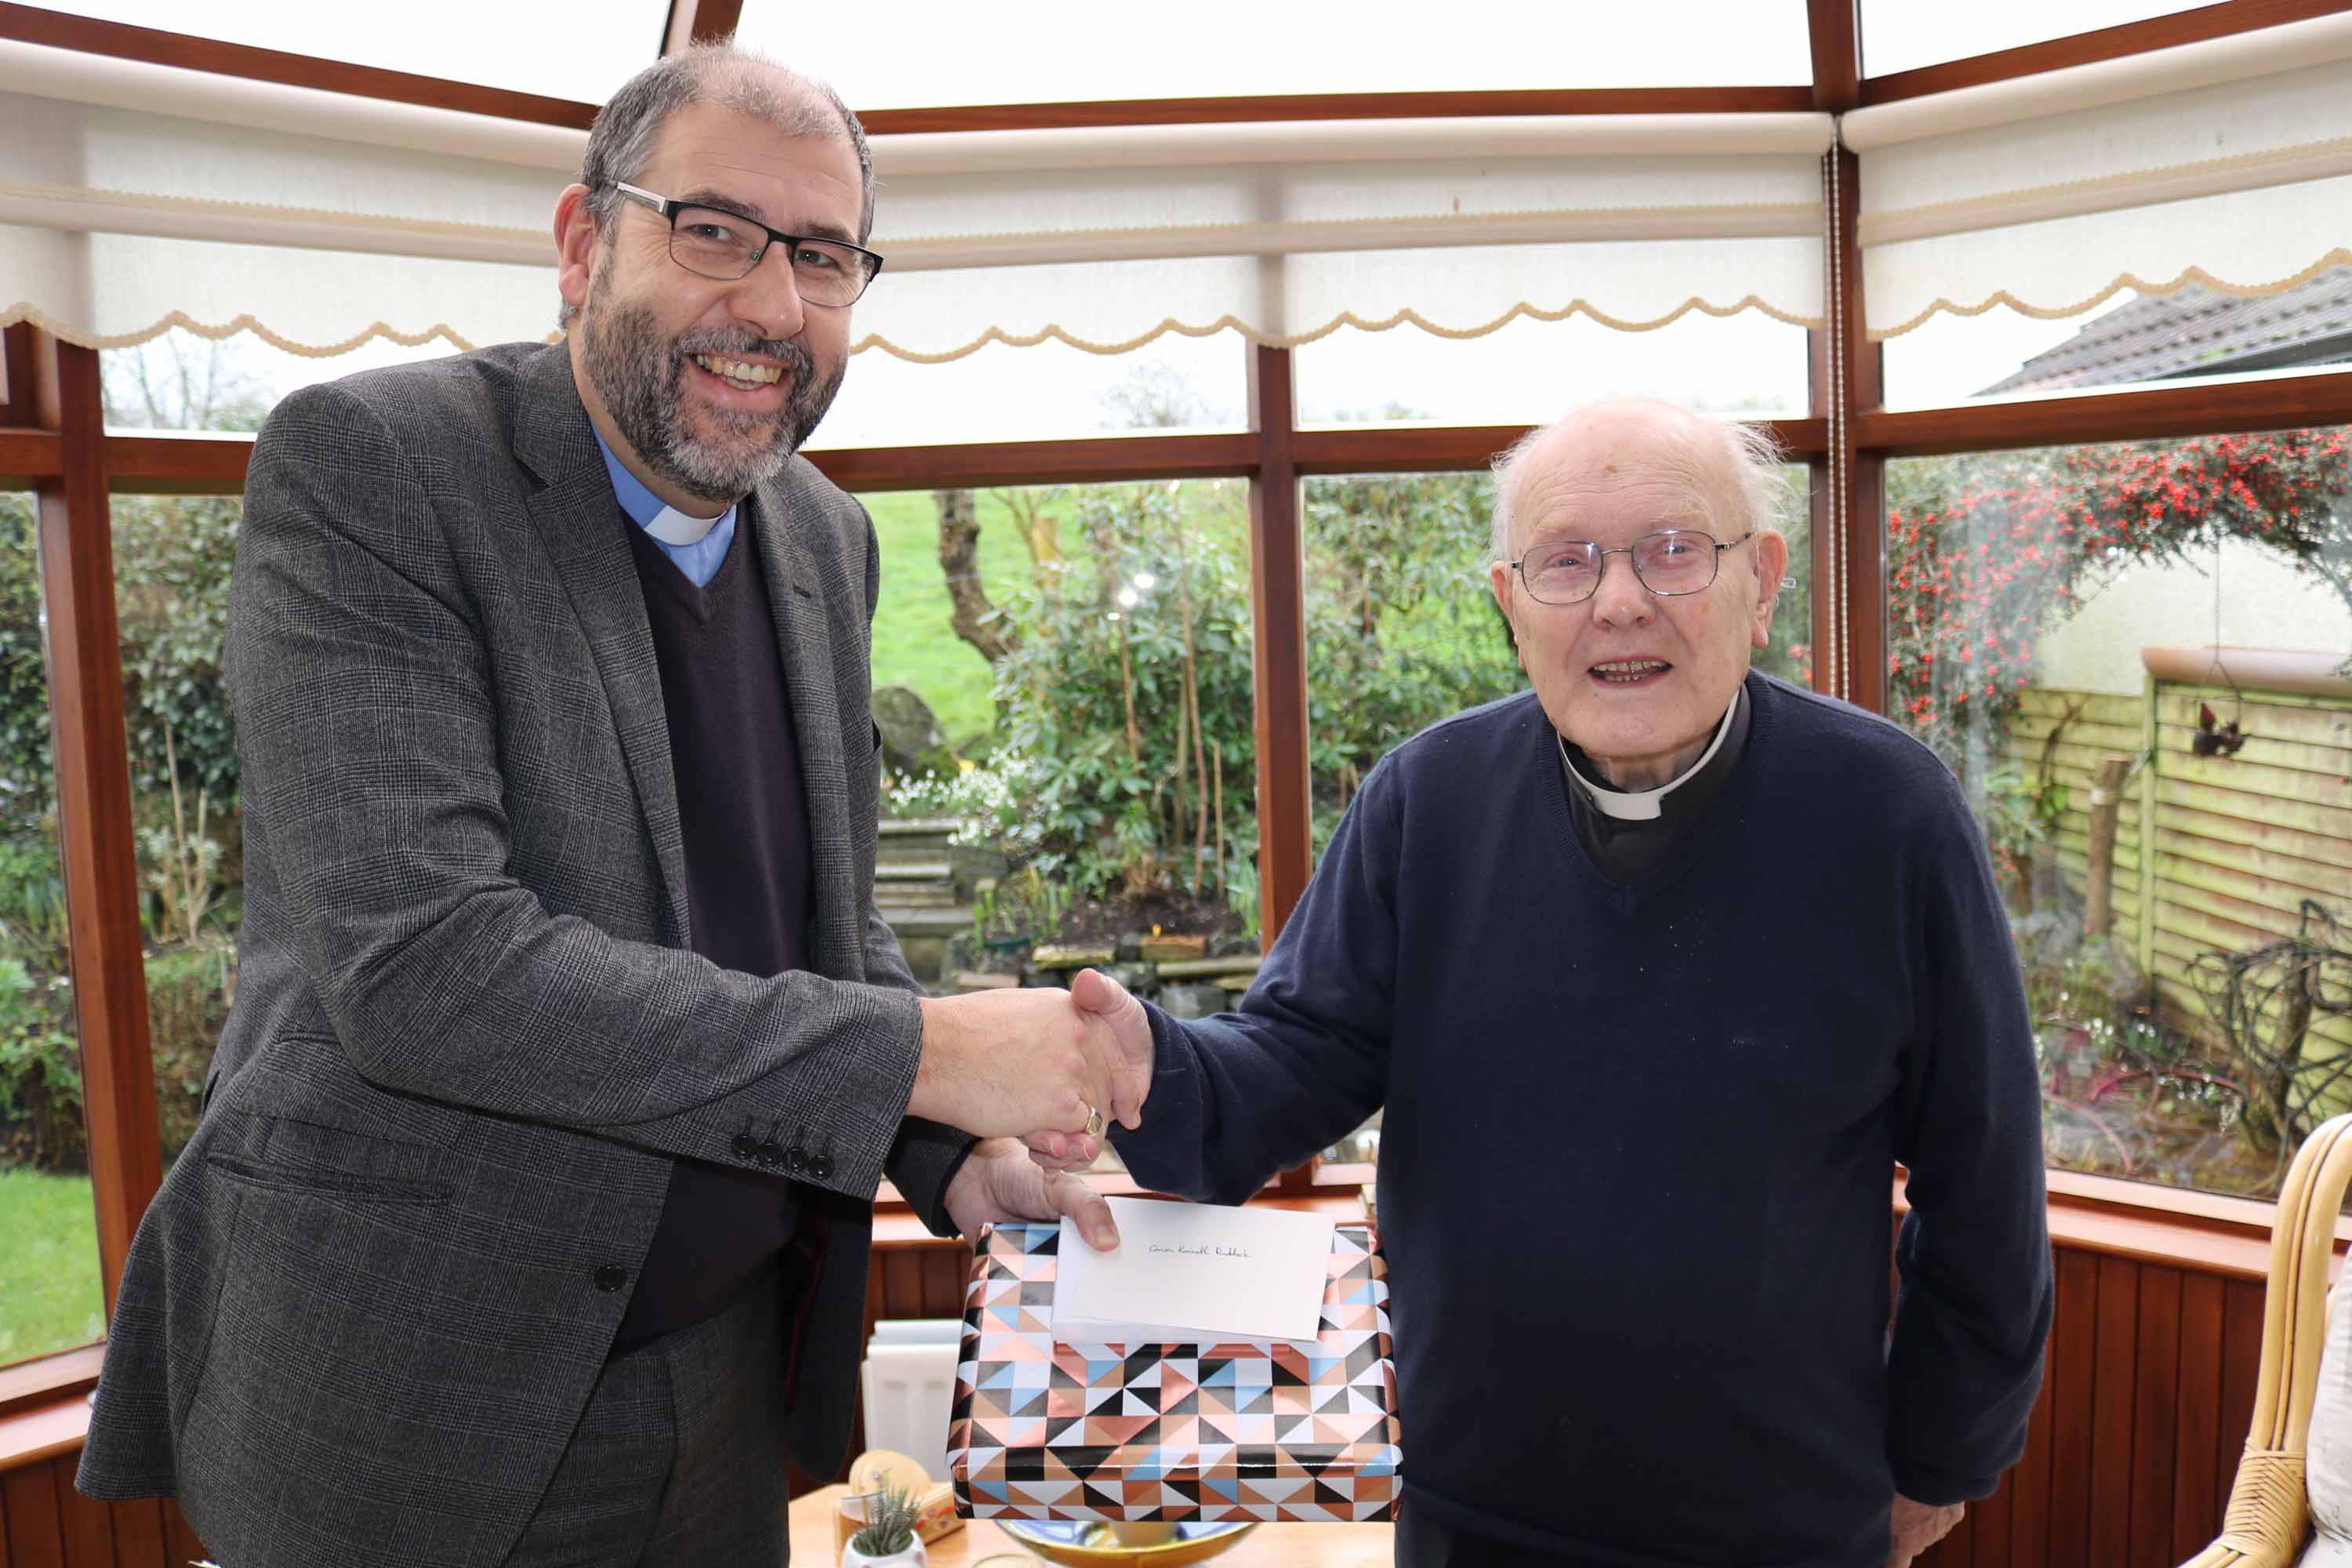 The Bishop of Connor's Commissary, Archdeacon George Davison, presents a gift to Canon Ken Ruddock as a thank you from the diocese on the occasion of his retirement.